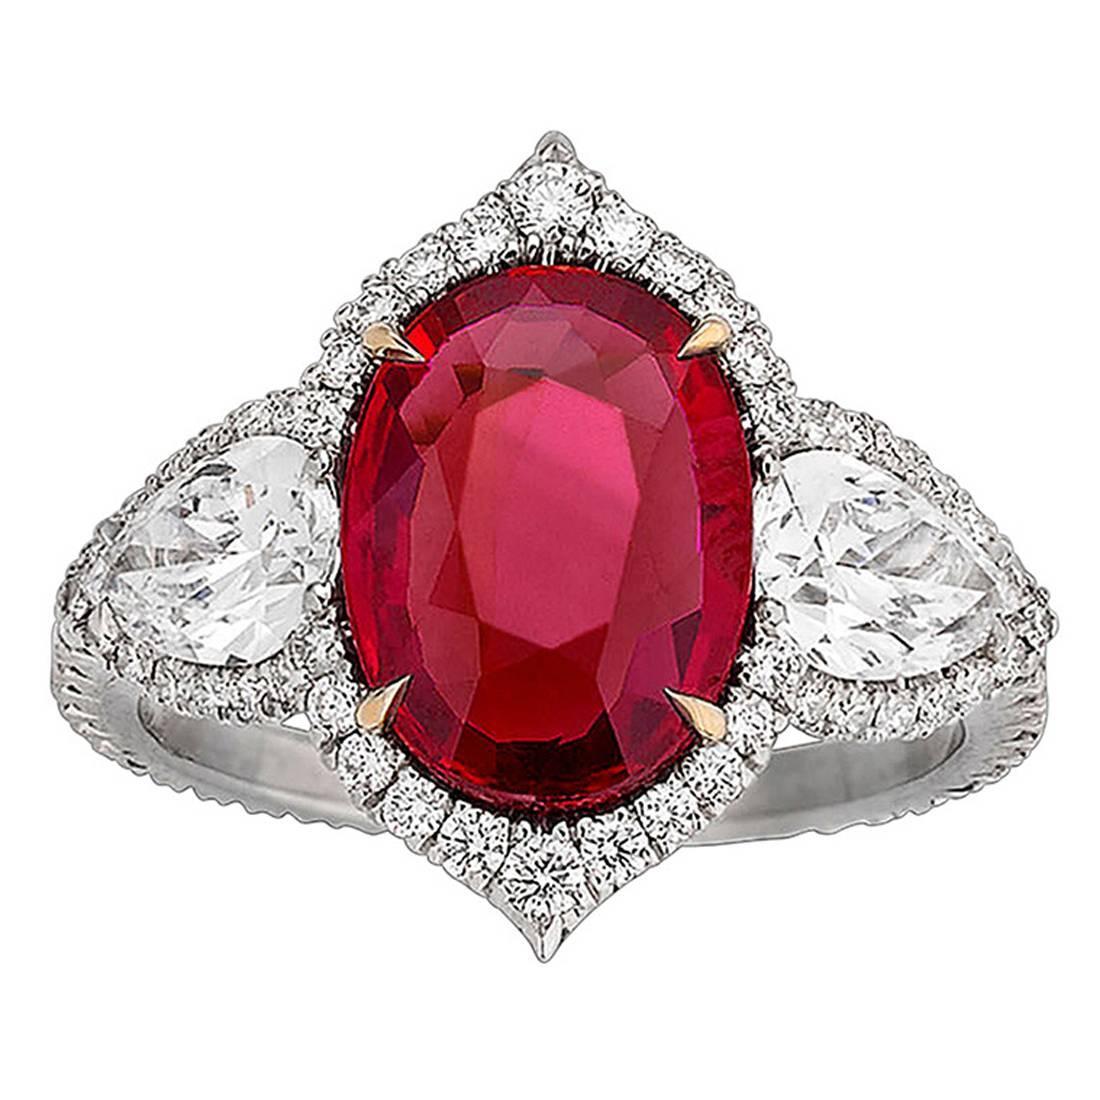 A Gorgeous Untreated Ruby and Diamond Ring 3.02 Carats. 